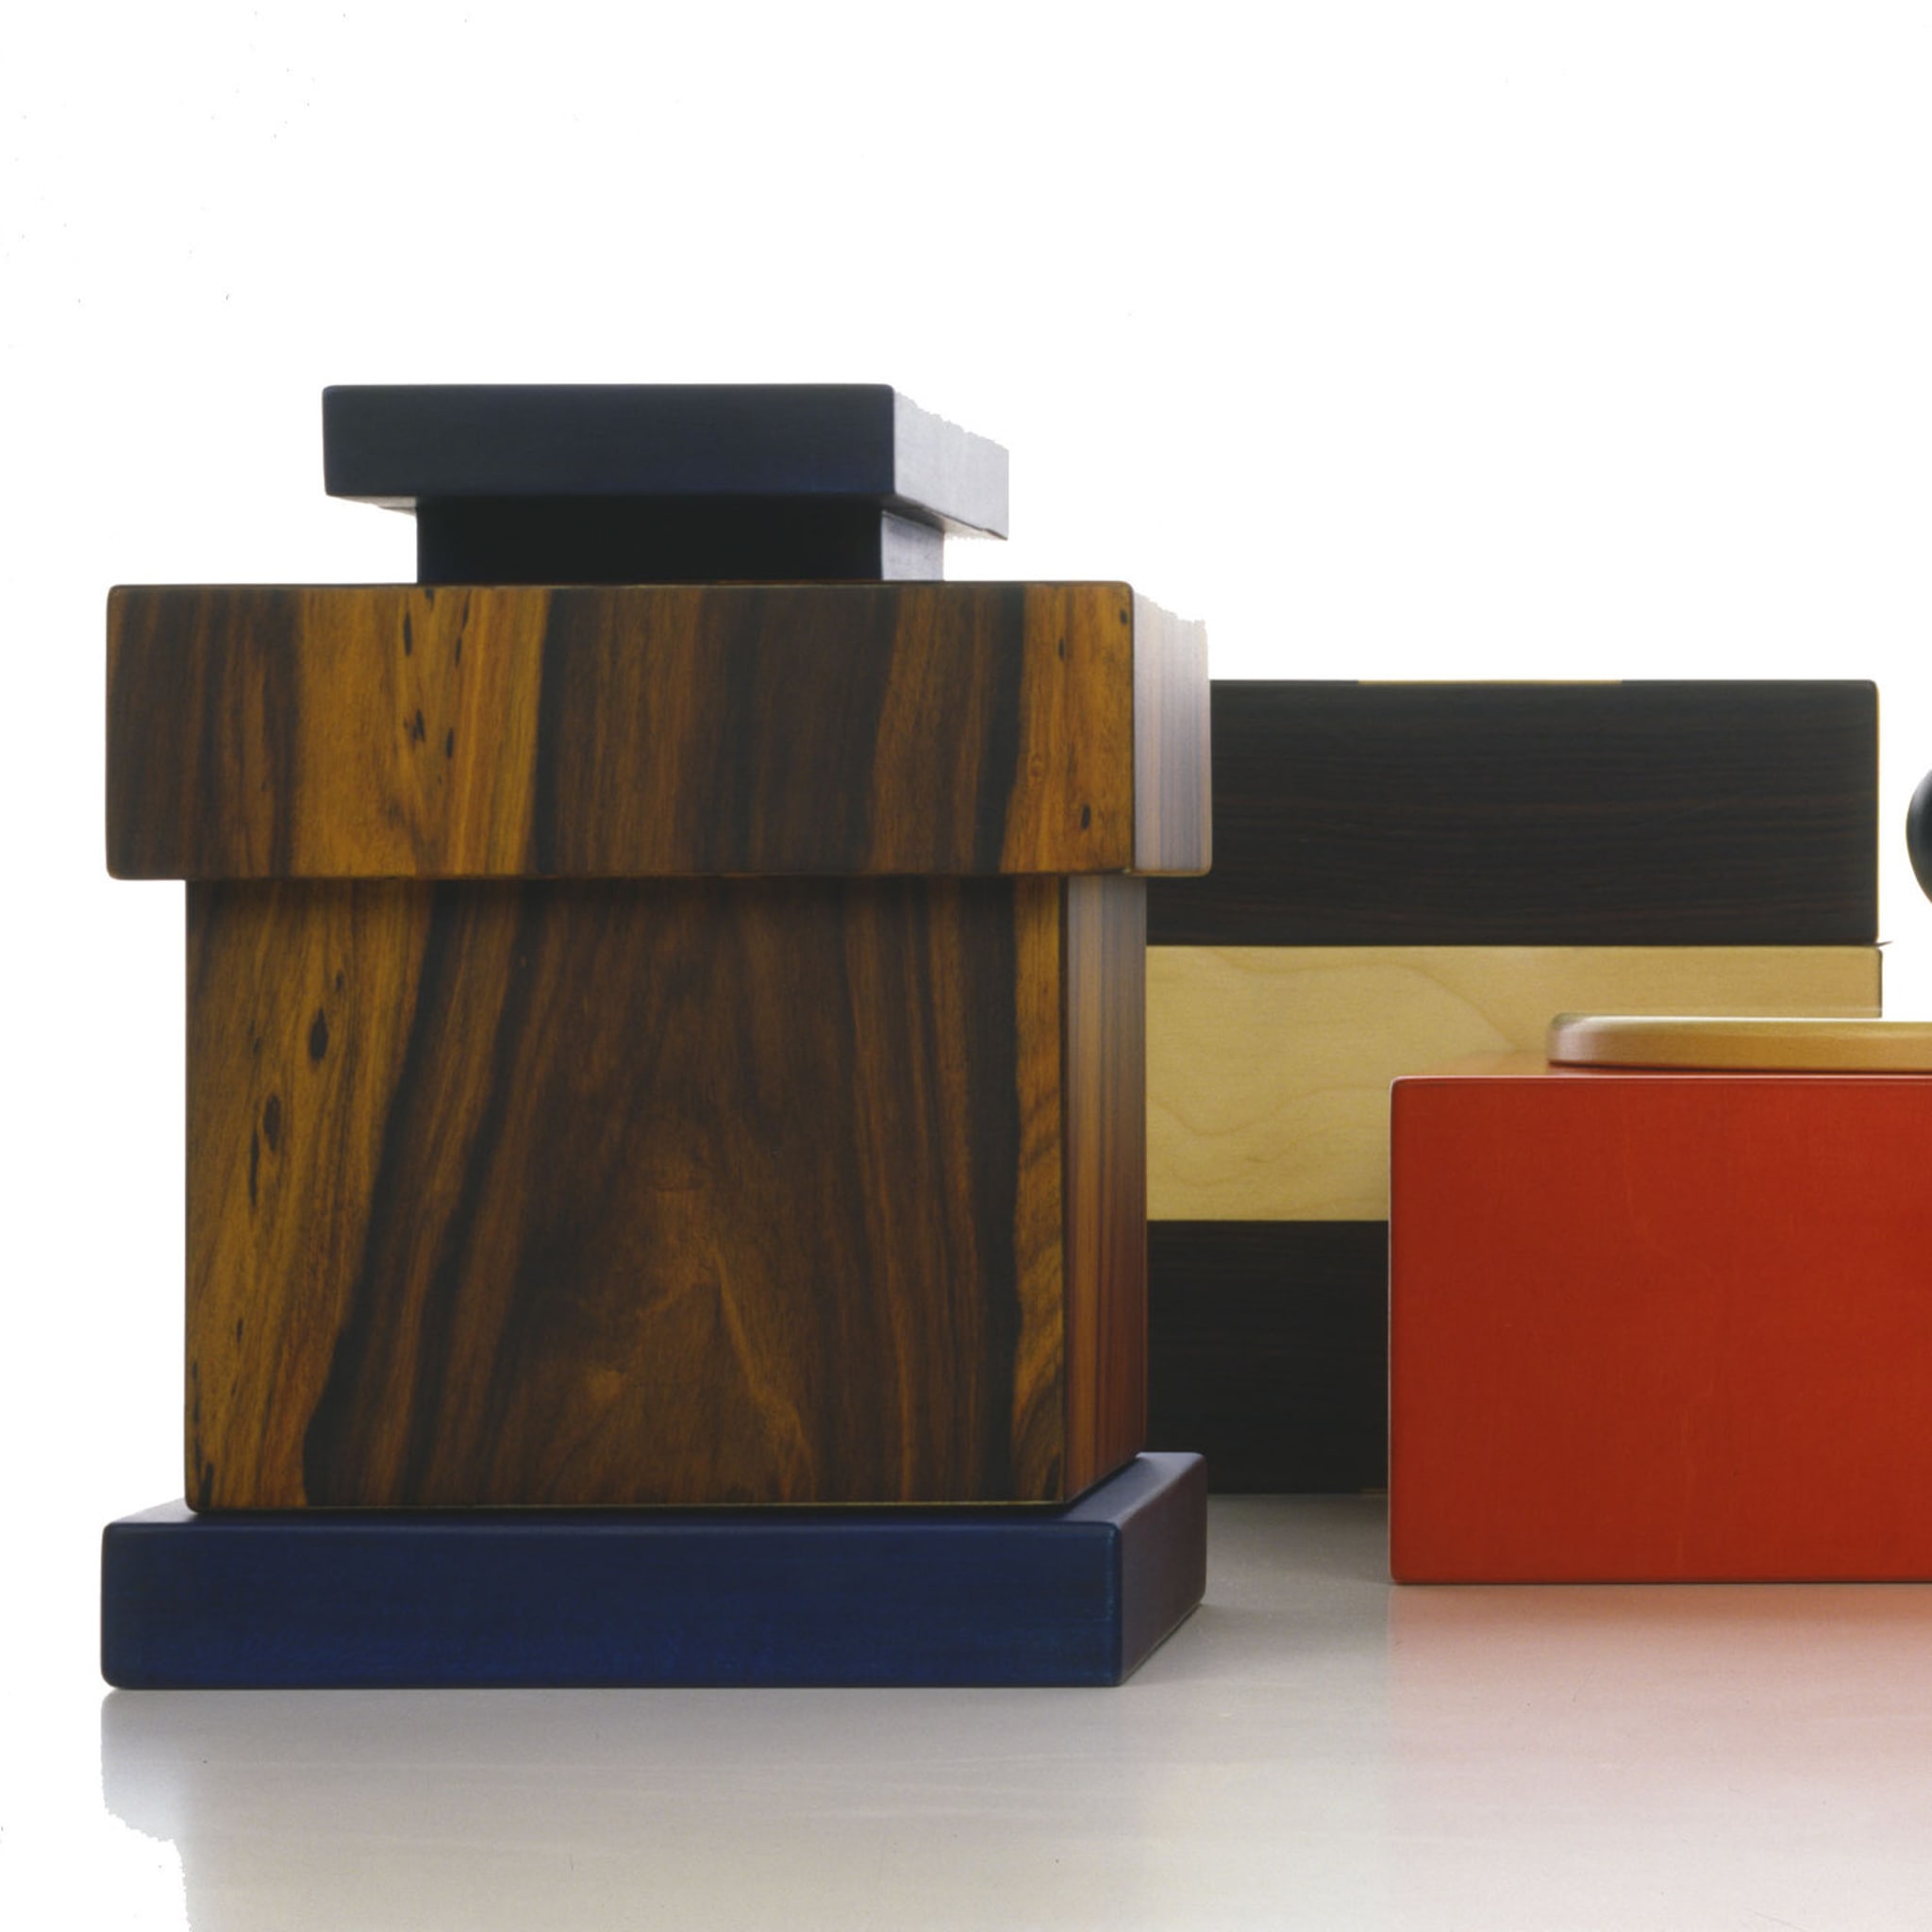 Agnese Limited Edition Box by Ettore Sottsass - Alternative view 3